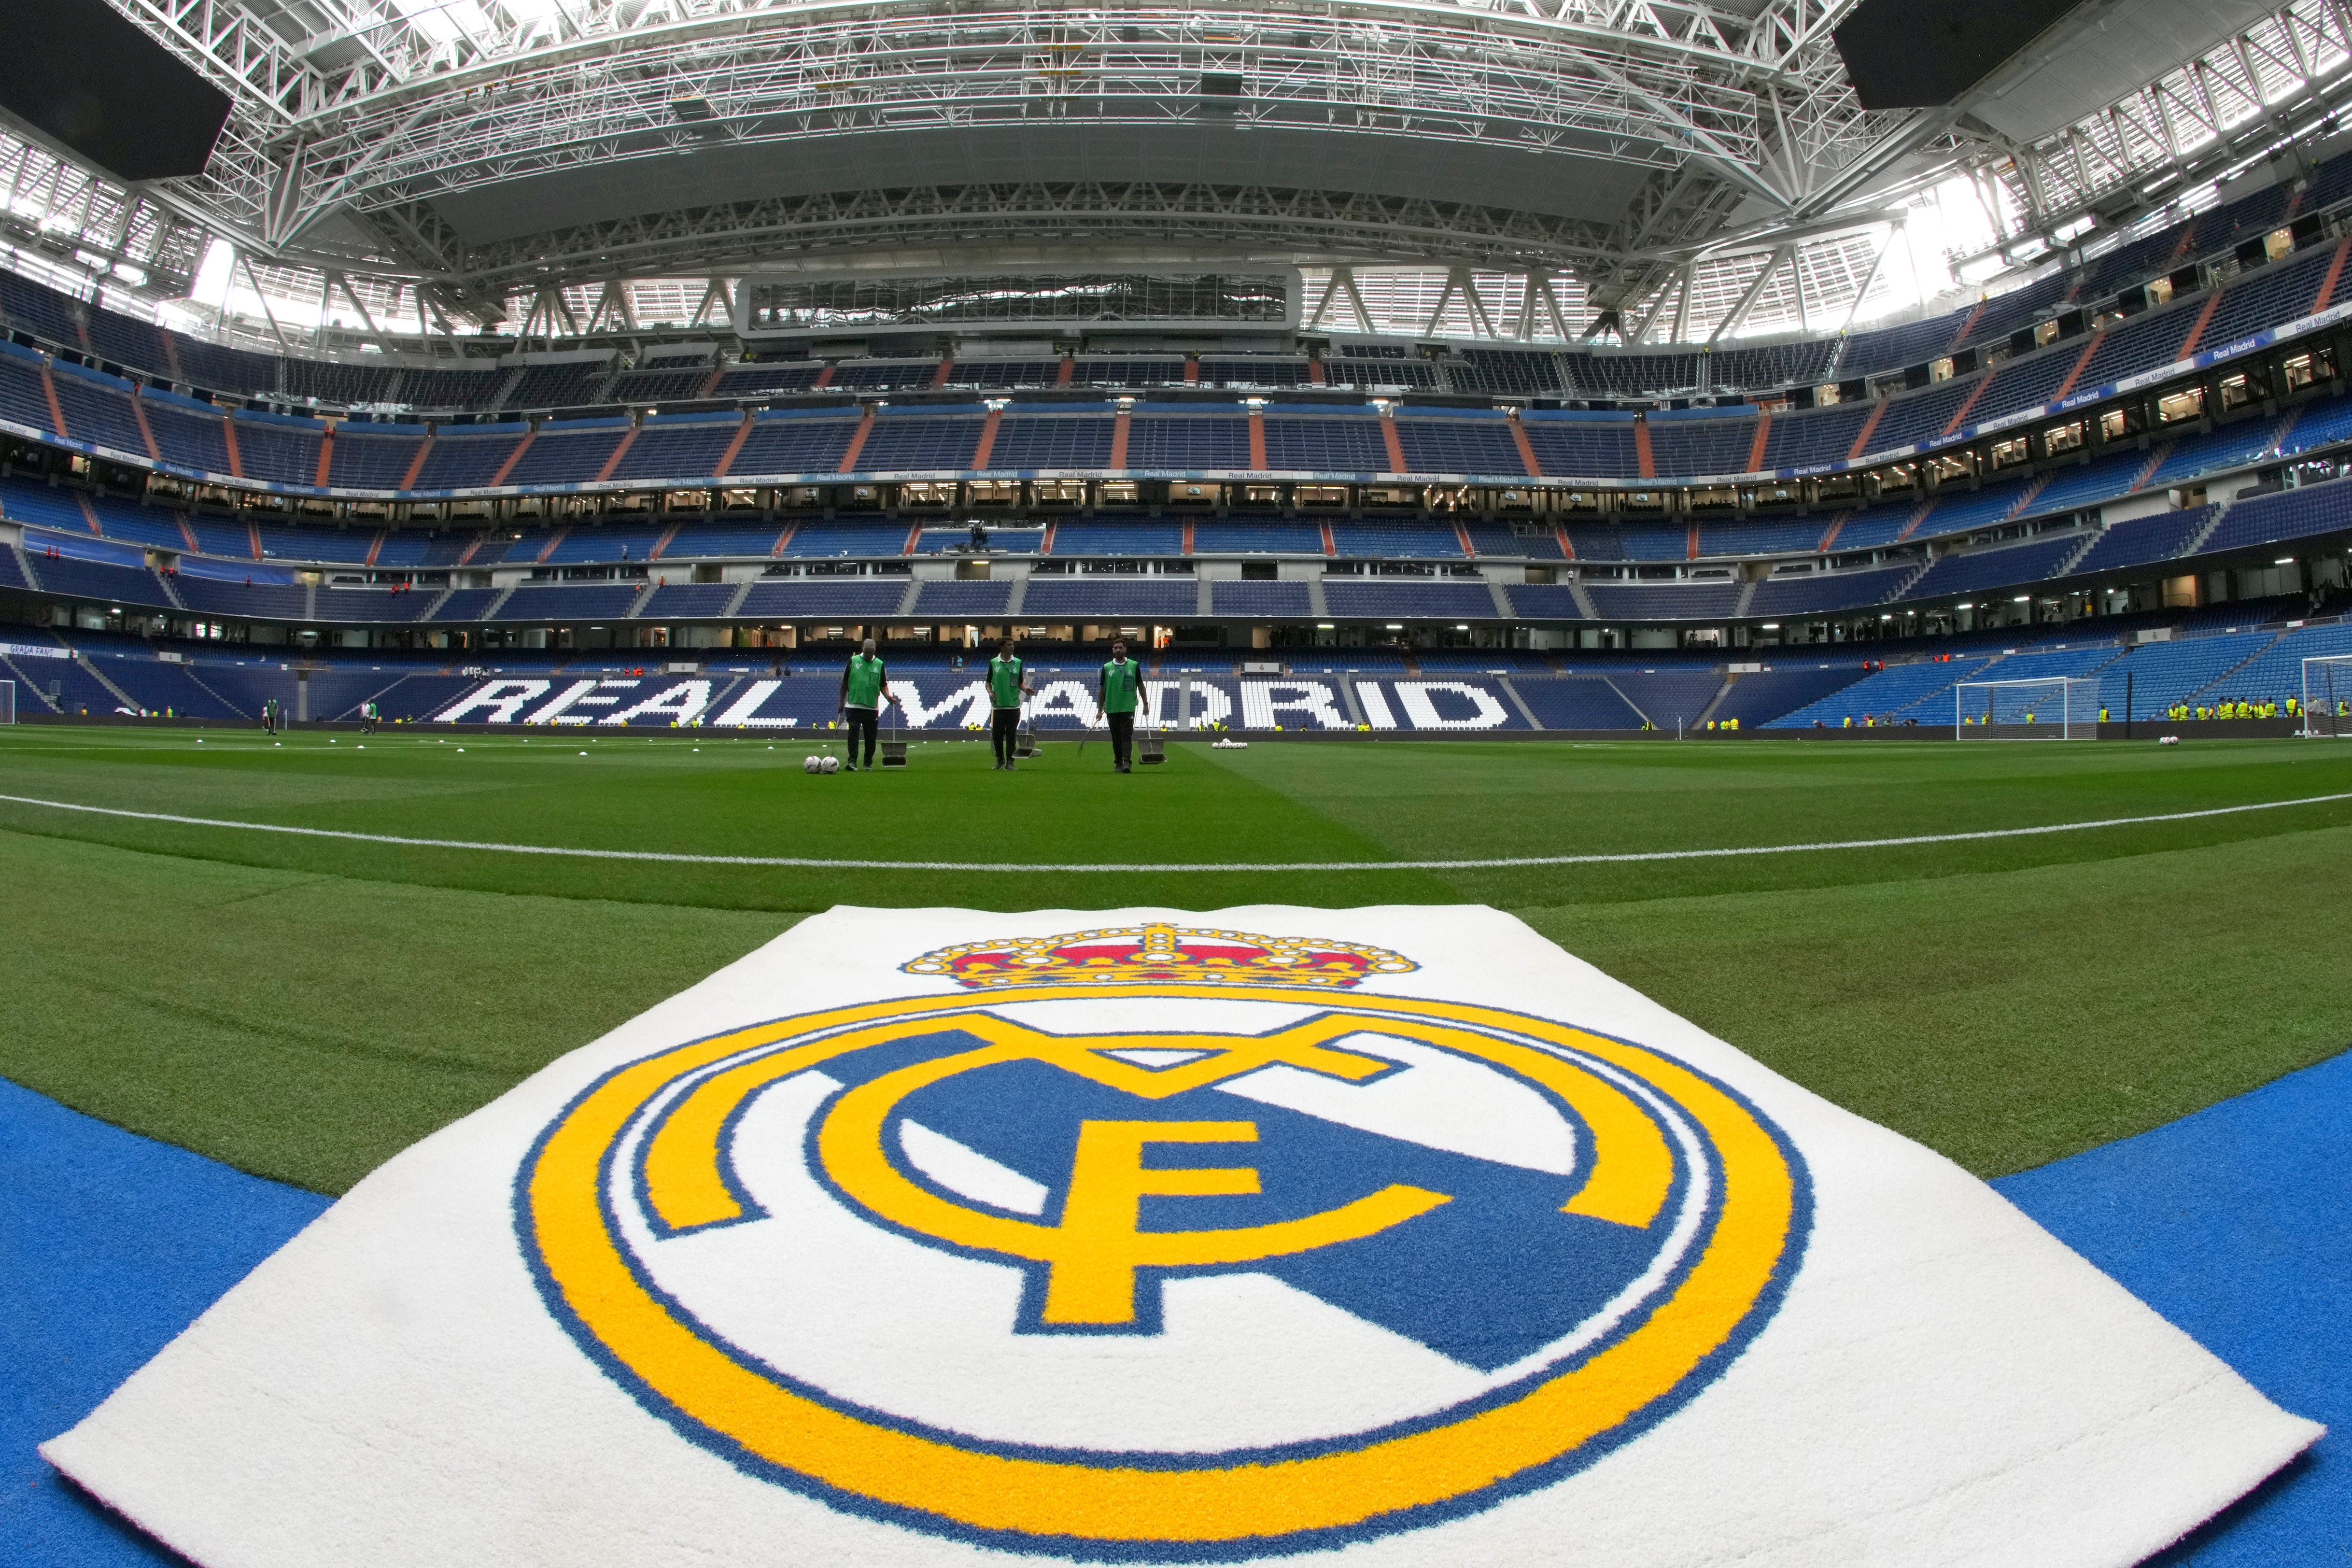 Three Real Madrid youth players have been arrested, according to reports